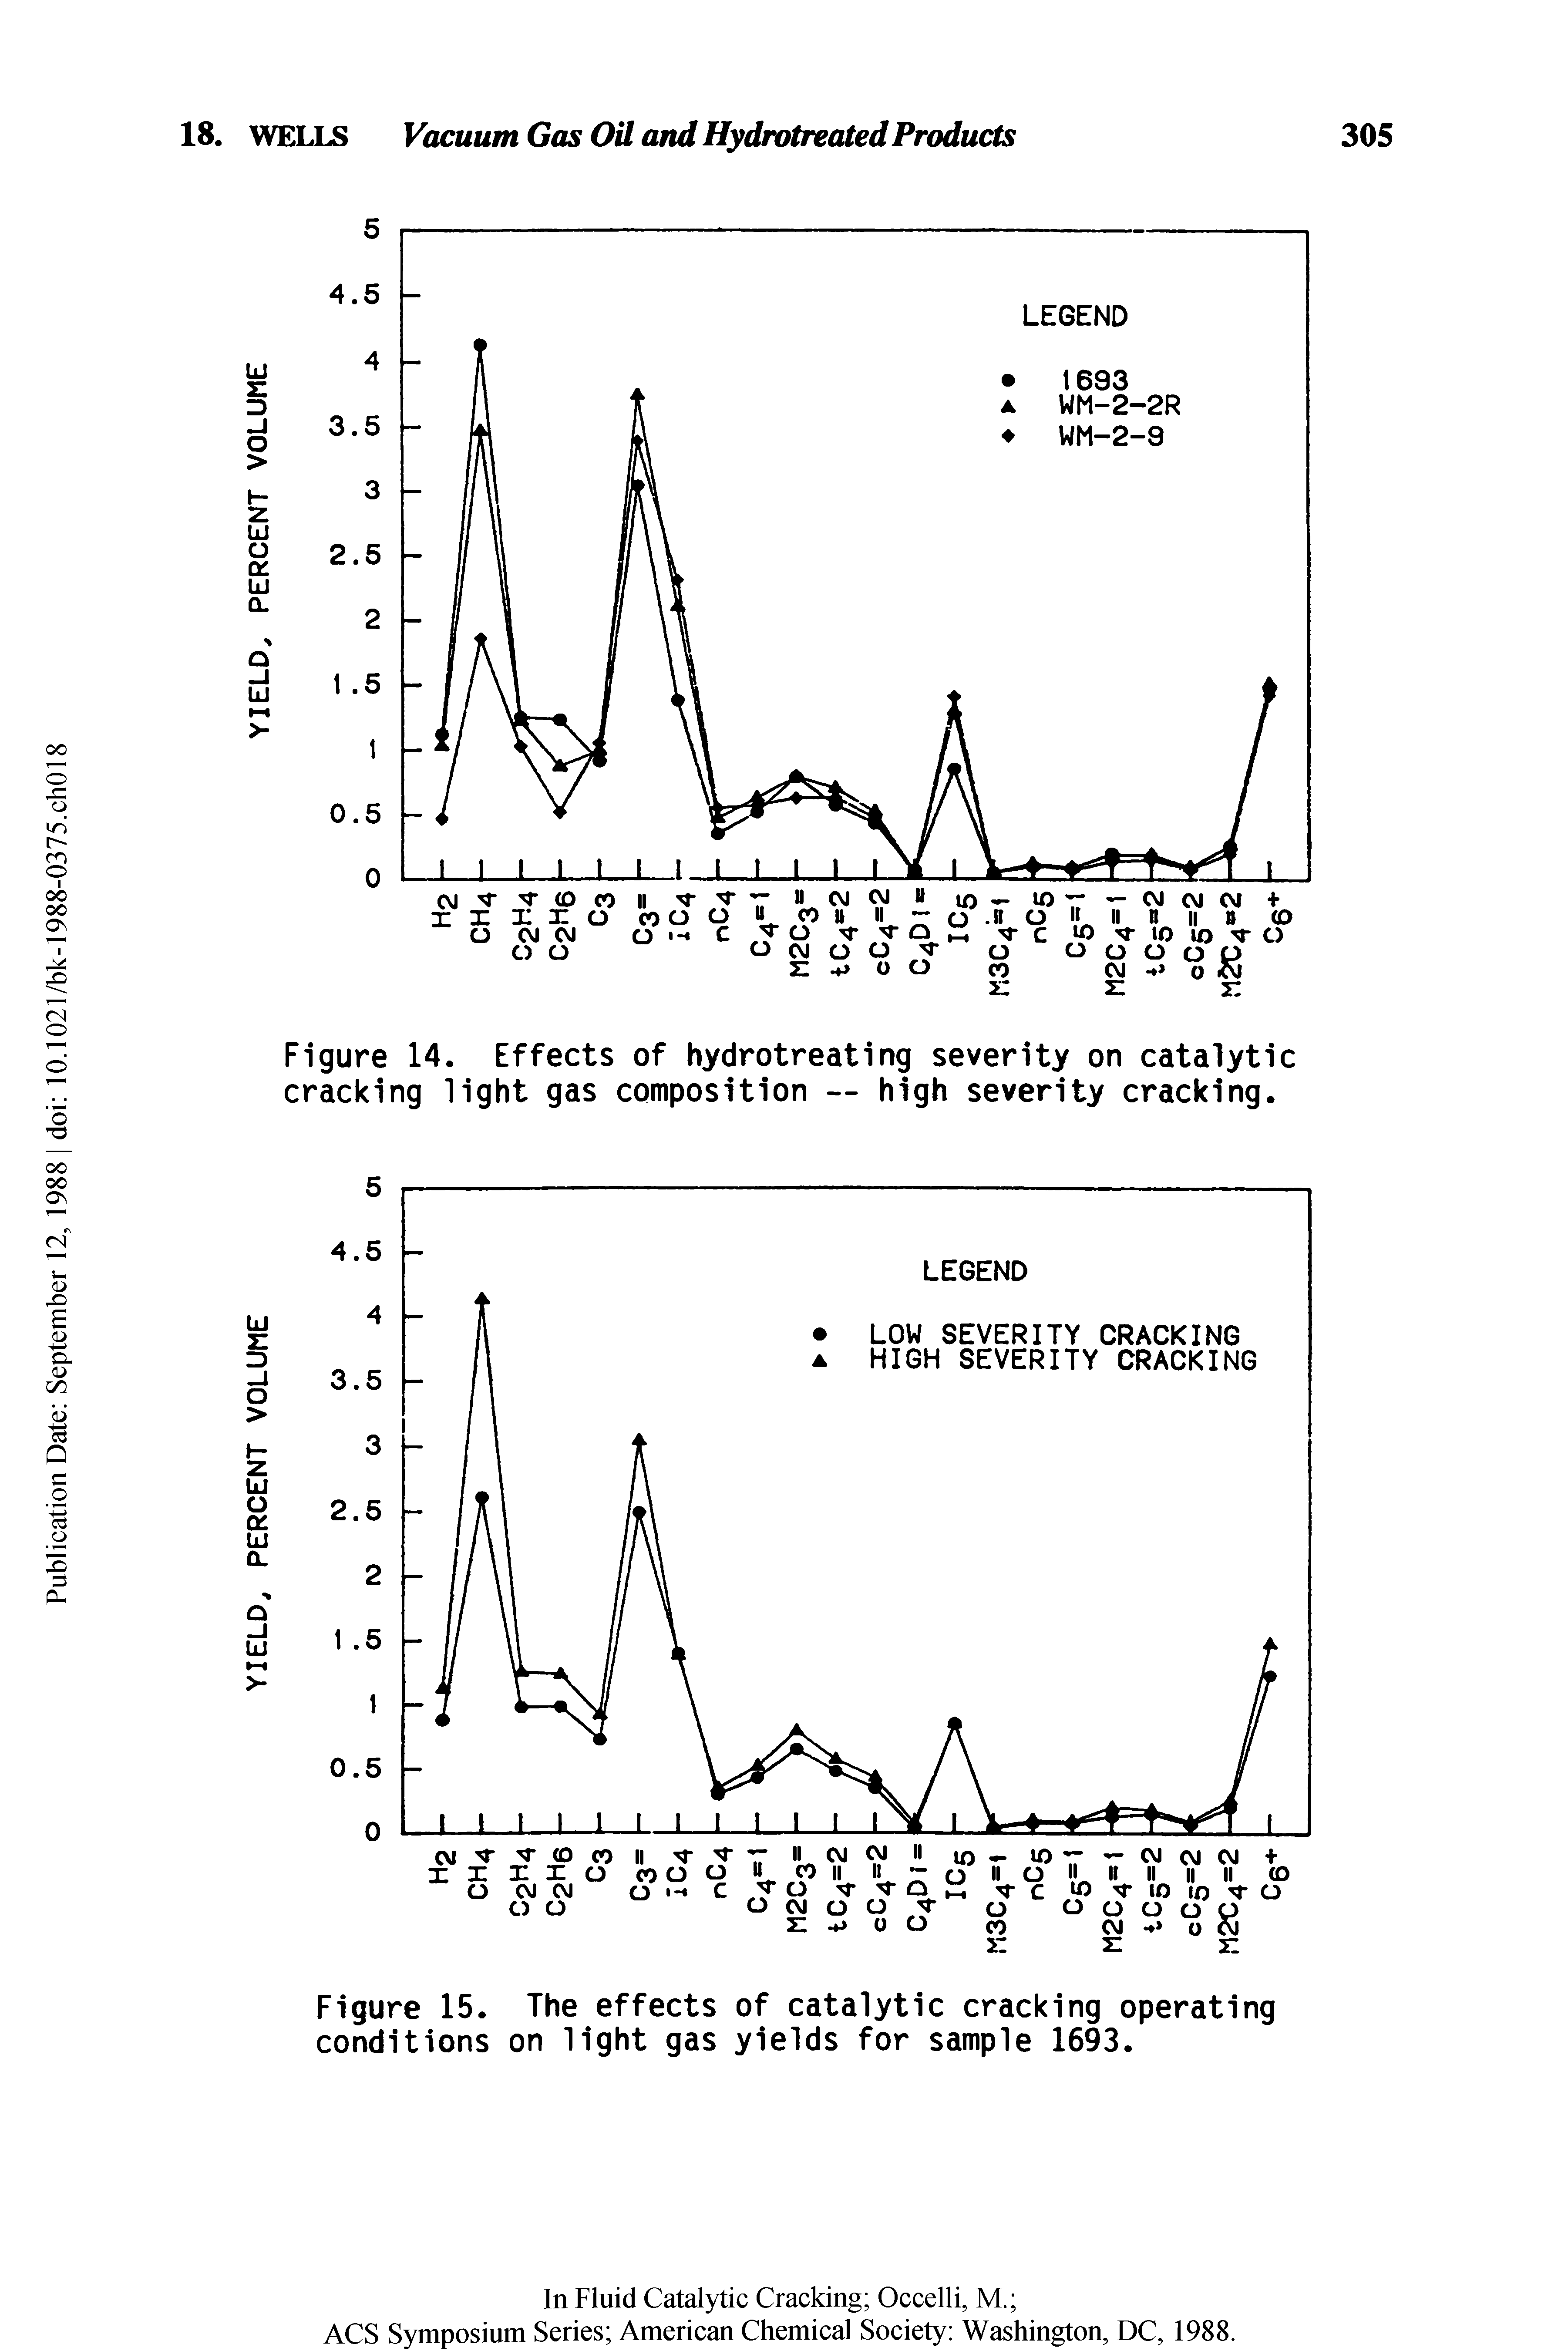 Figure 15. The effects of catalytic cracking operating conditions on light gas yields for sample 1693.